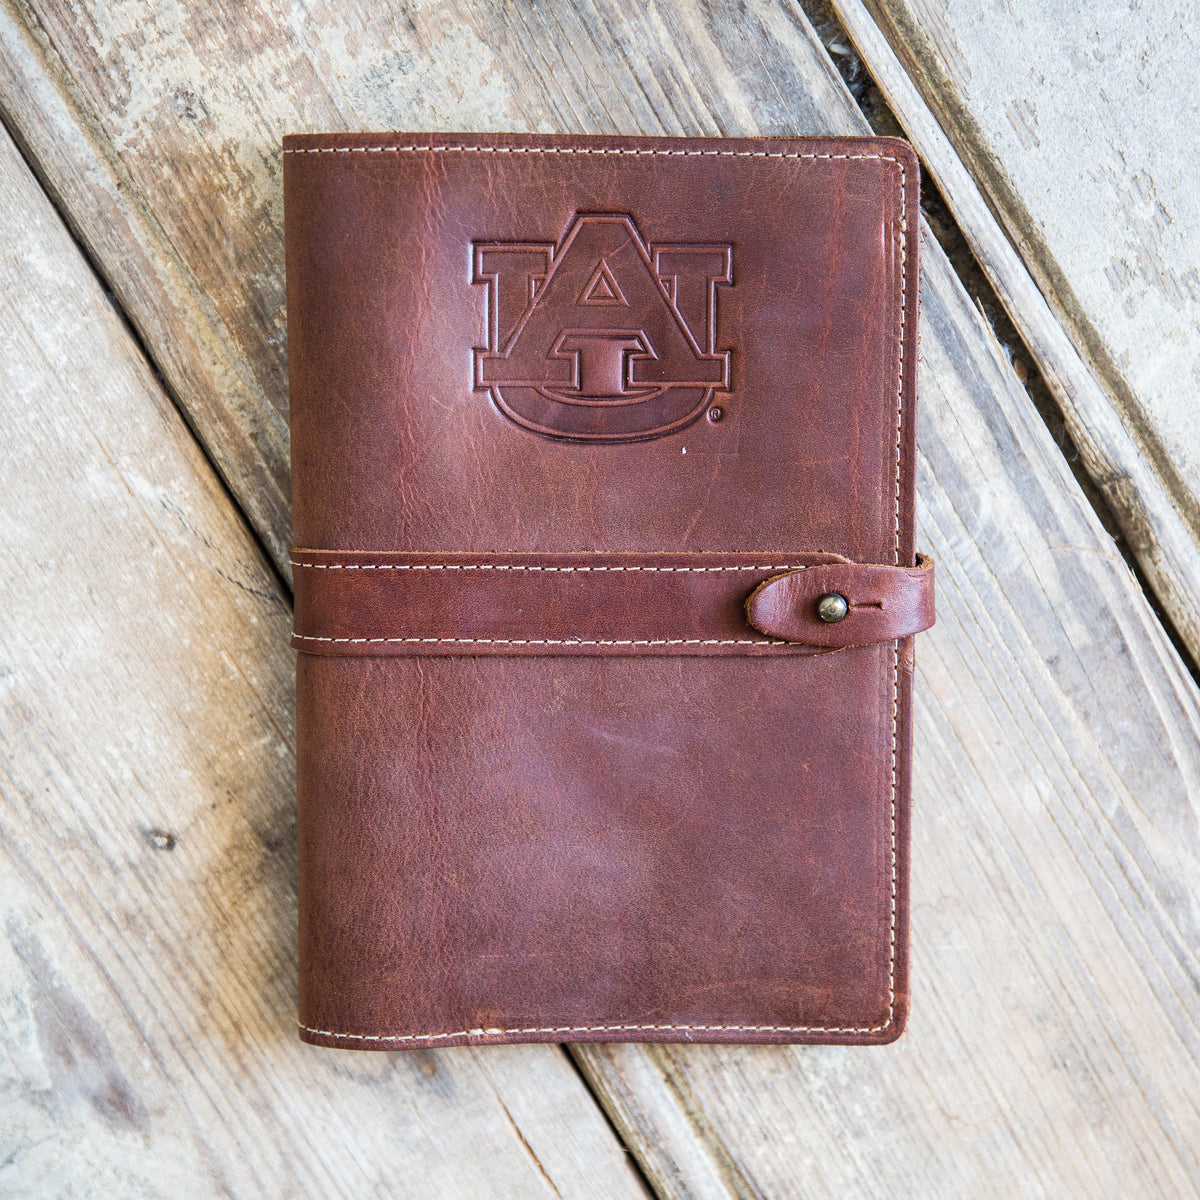 Fine leather journal cover with Auburn University logo